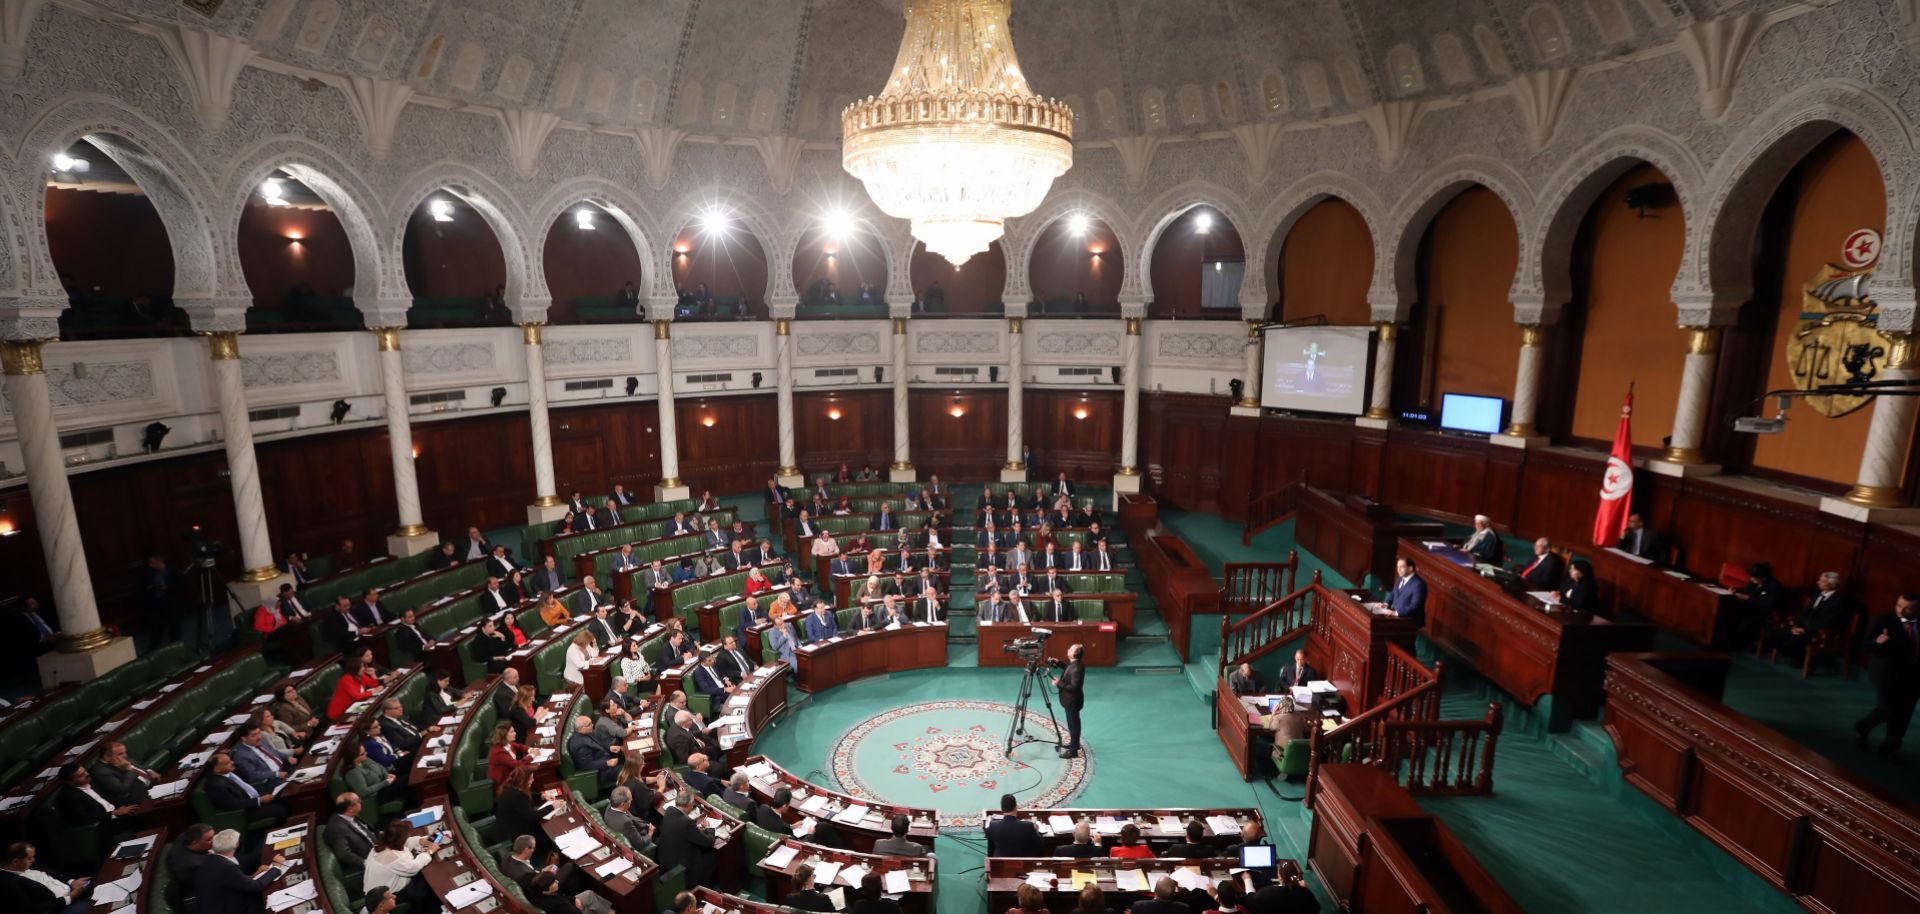 The Tunisian parliament holds a session in November 2018.